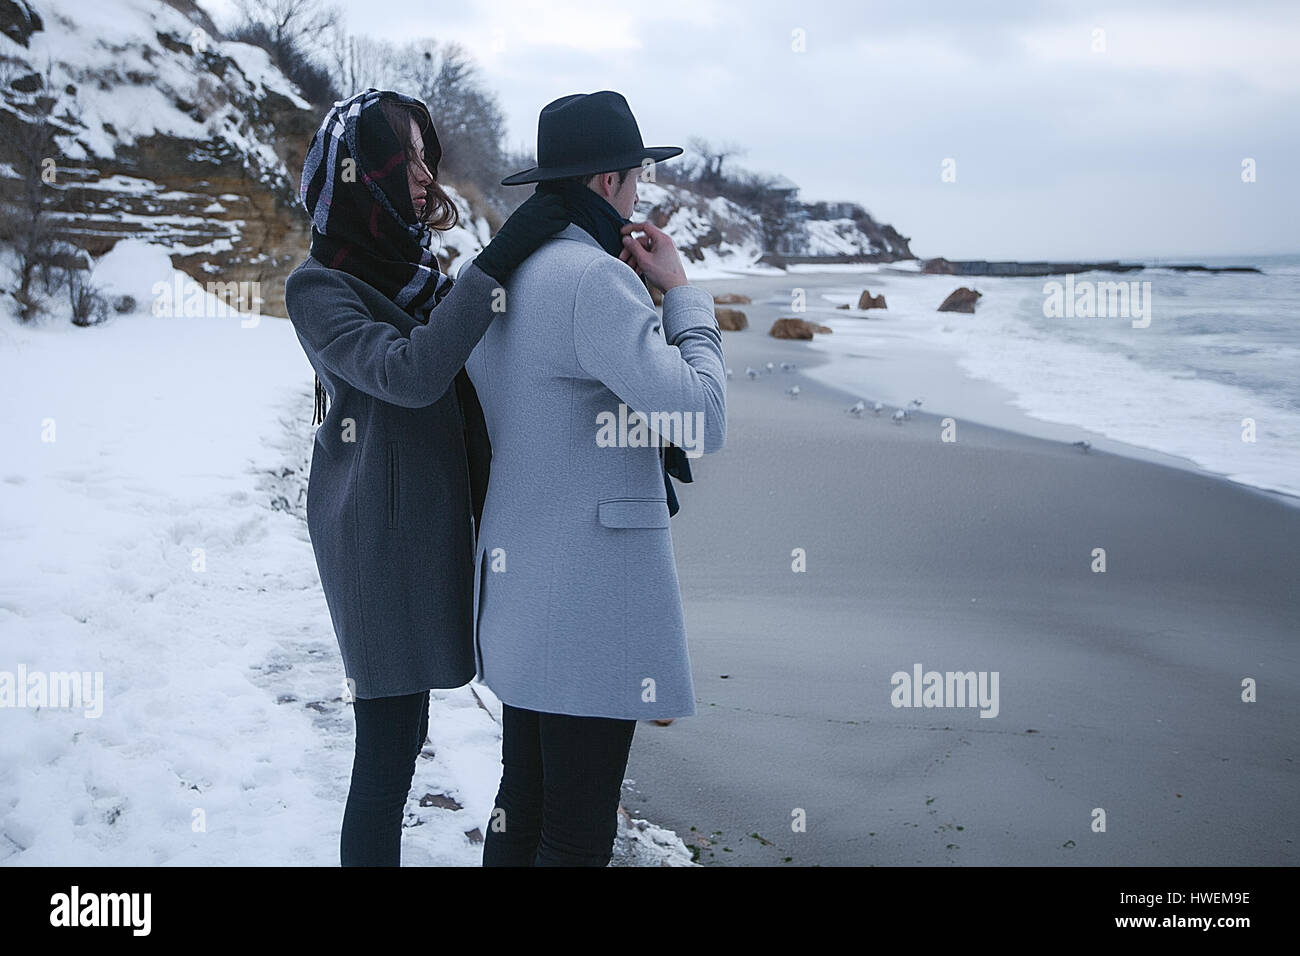 Couple on winter vacation, Odessa, Ukraine Banque D'Images